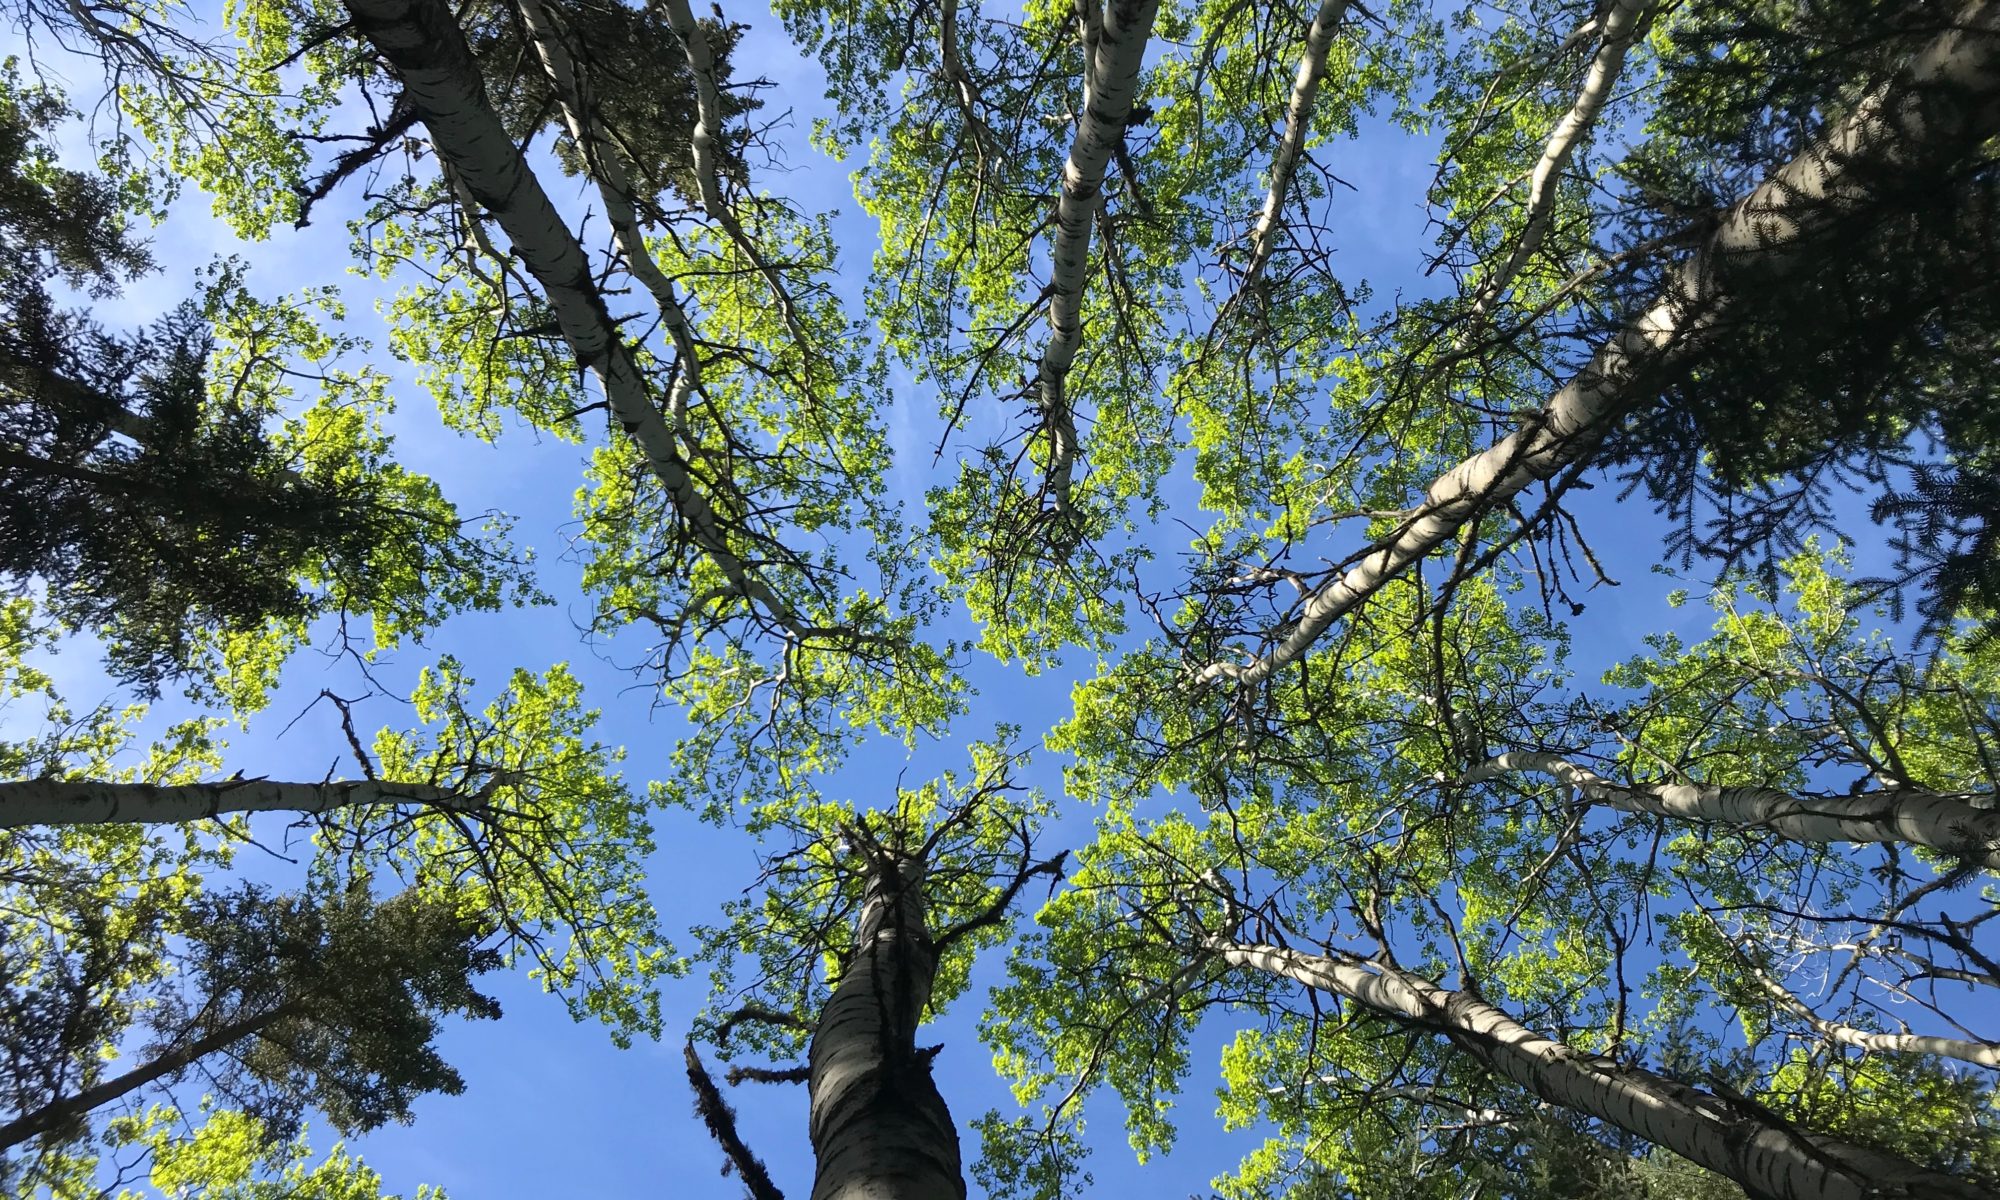 Looking at a blue sky through an aspen forest canopy shows how the trees ensure that each tree has access to the sunlight.